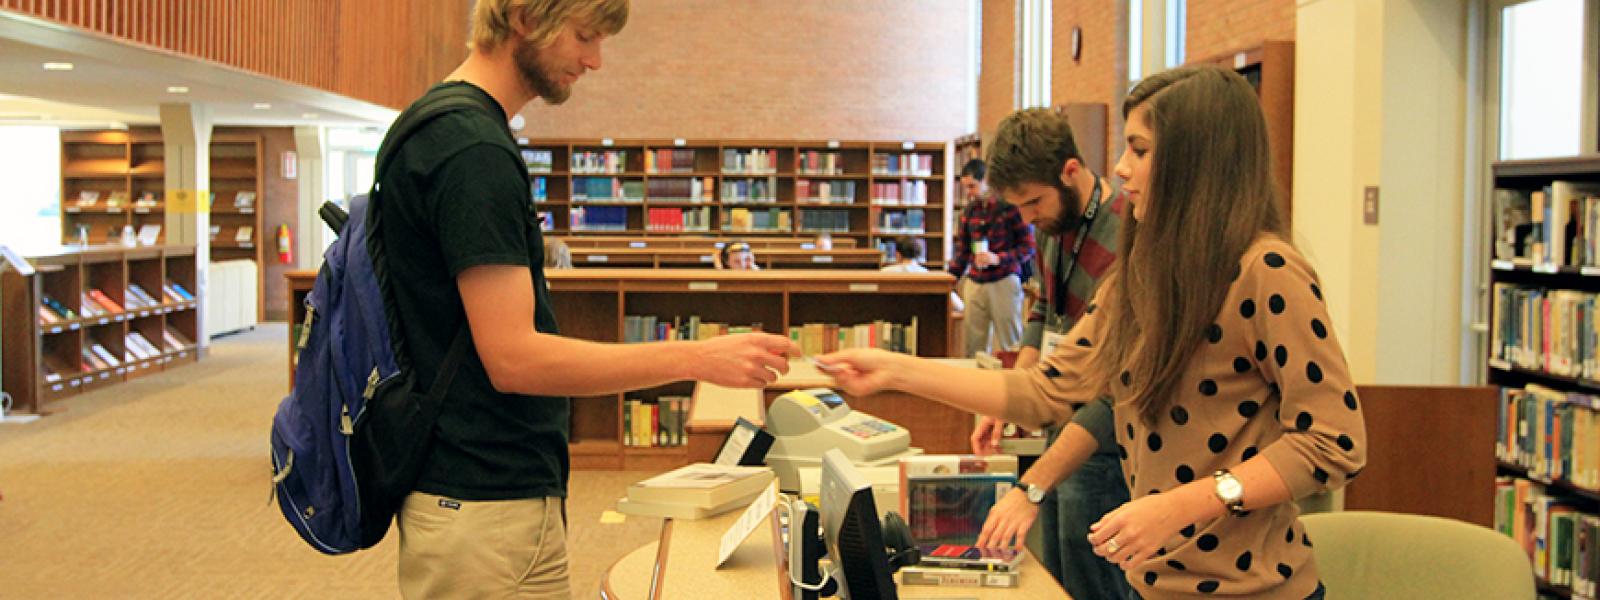 A photo of a student worker assisting a student in the library at Columbia International University.